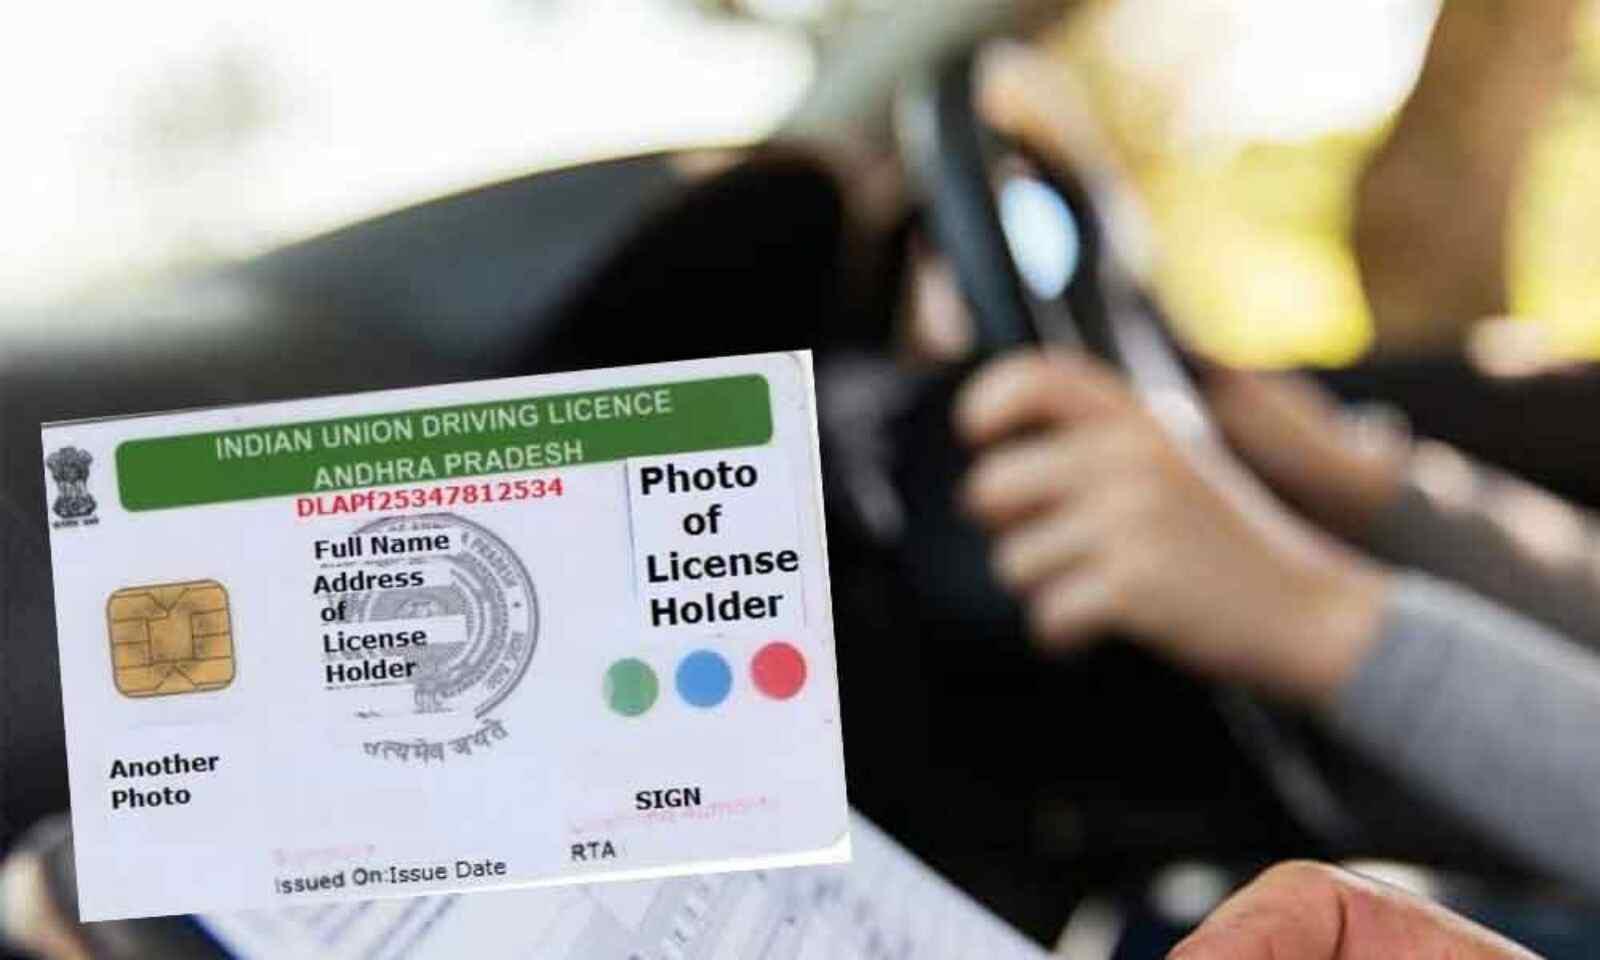 How To Get A Duplicate Driving Licence?